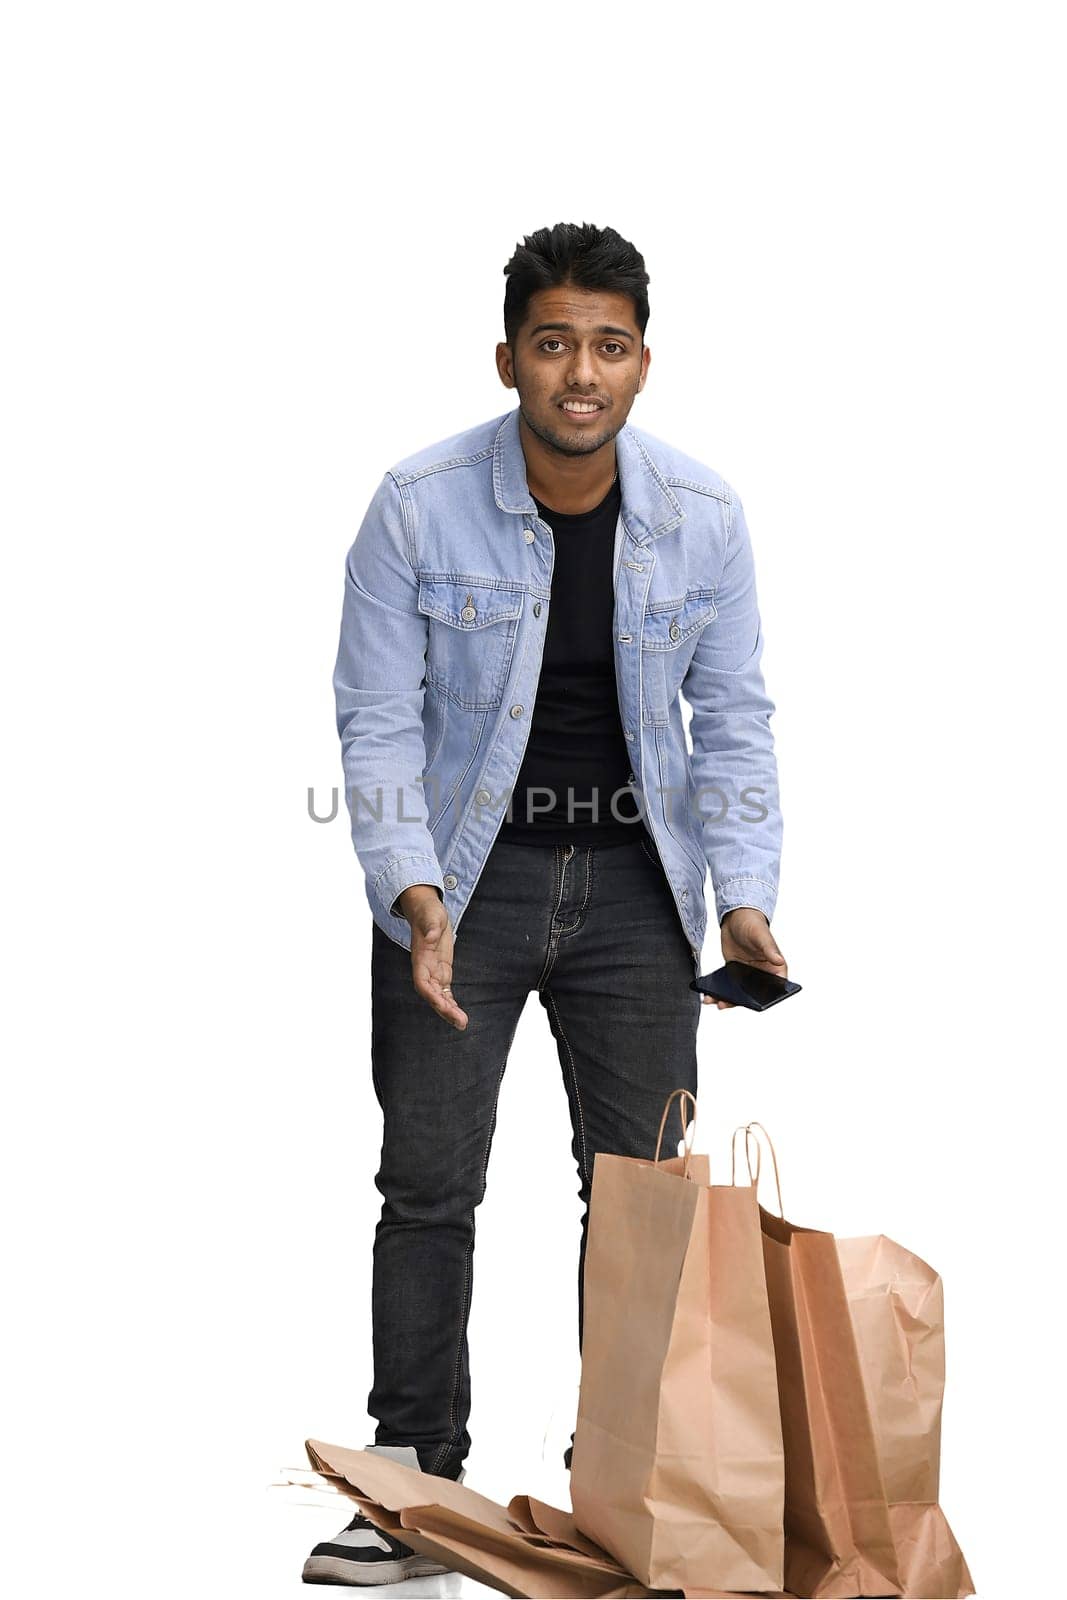 Man on a white background with shoppers by Prosto